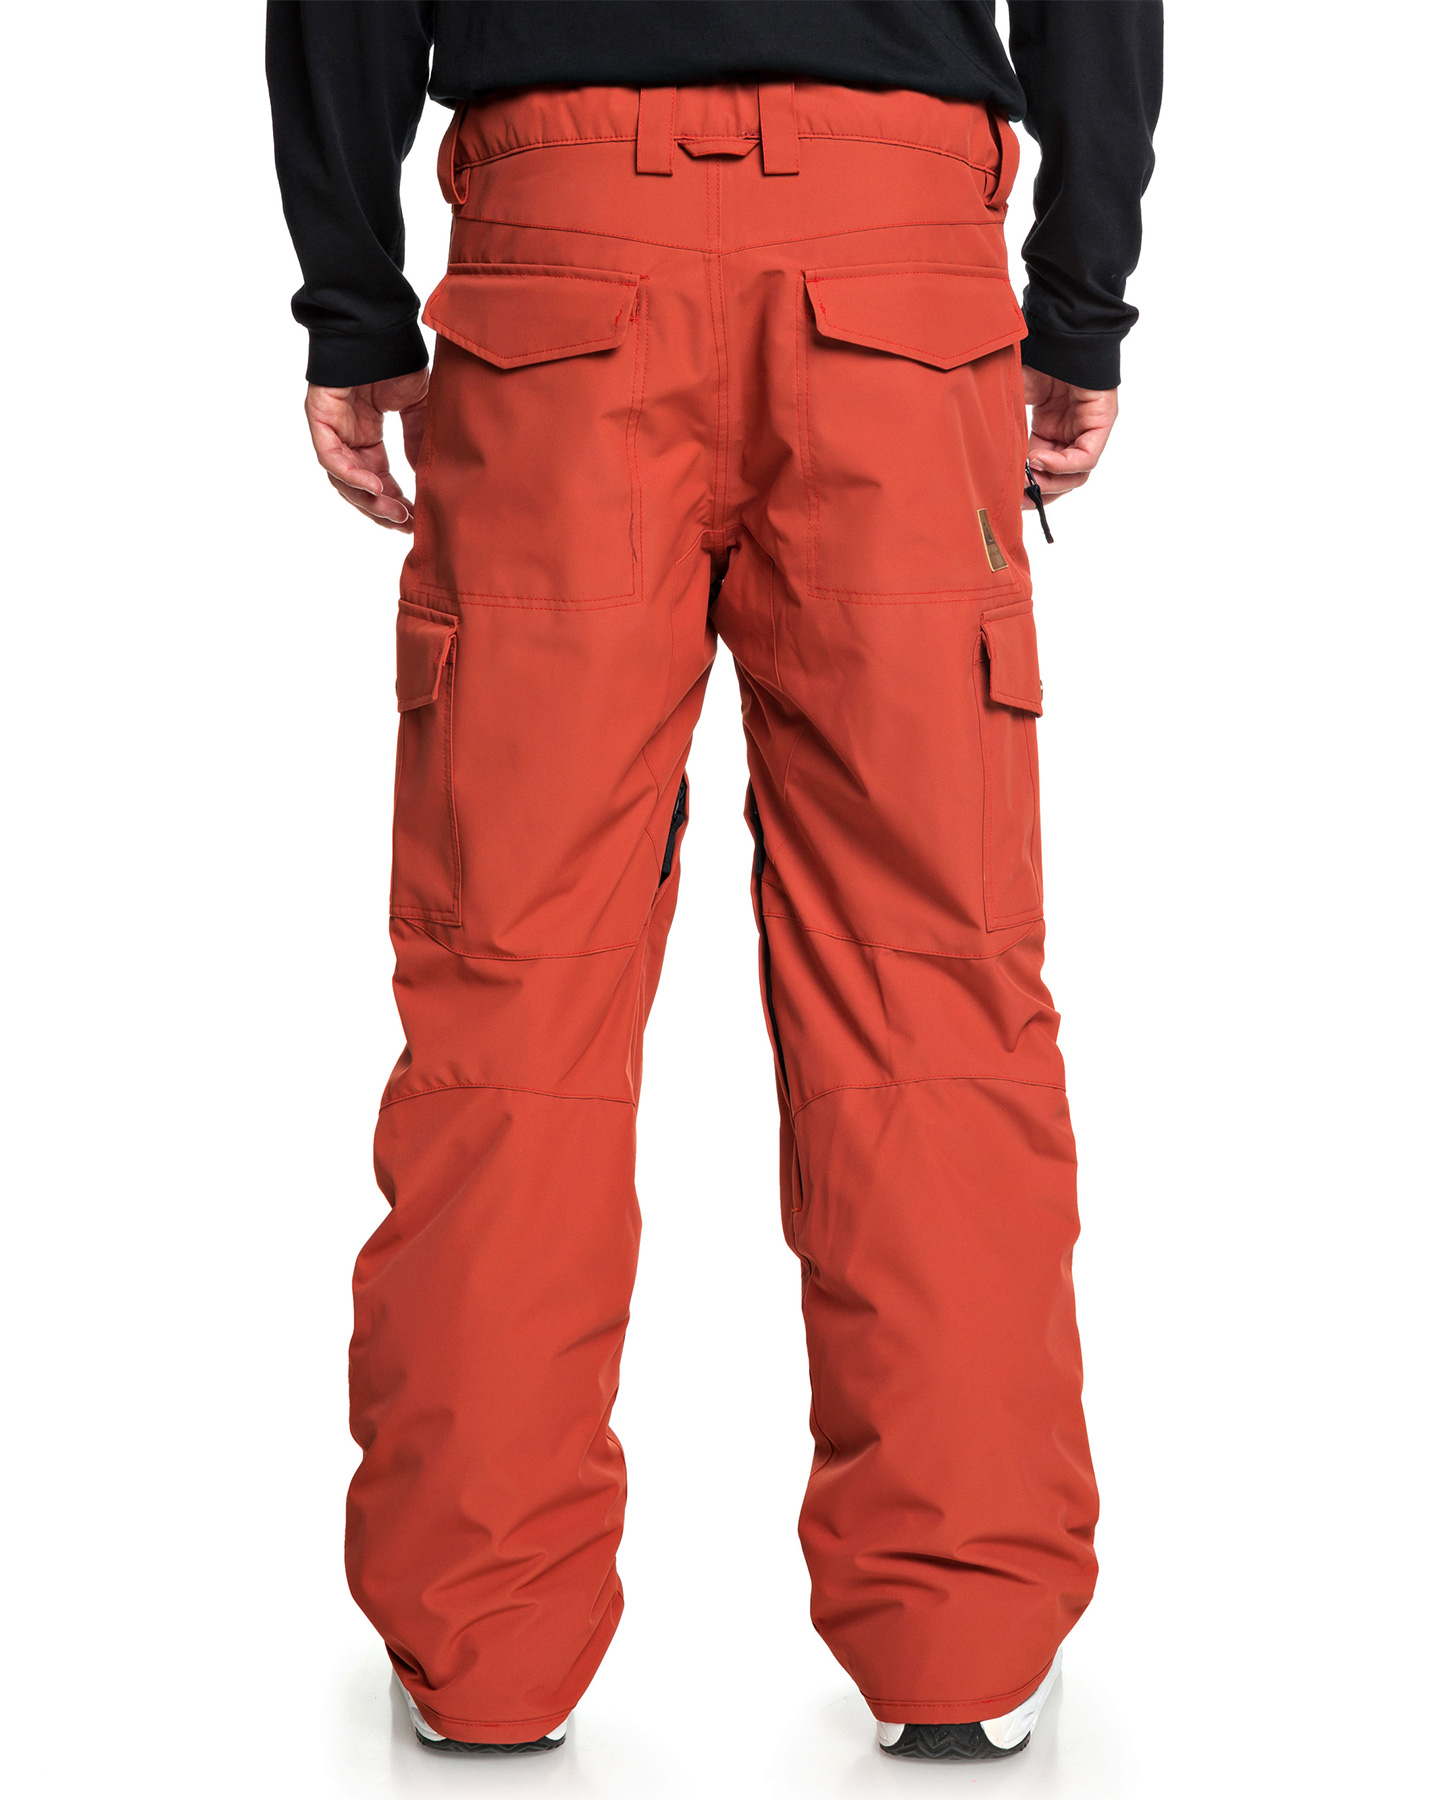 Quiksilver Mens Porter 10K Snow Pant - Barn Red | SurfStitch